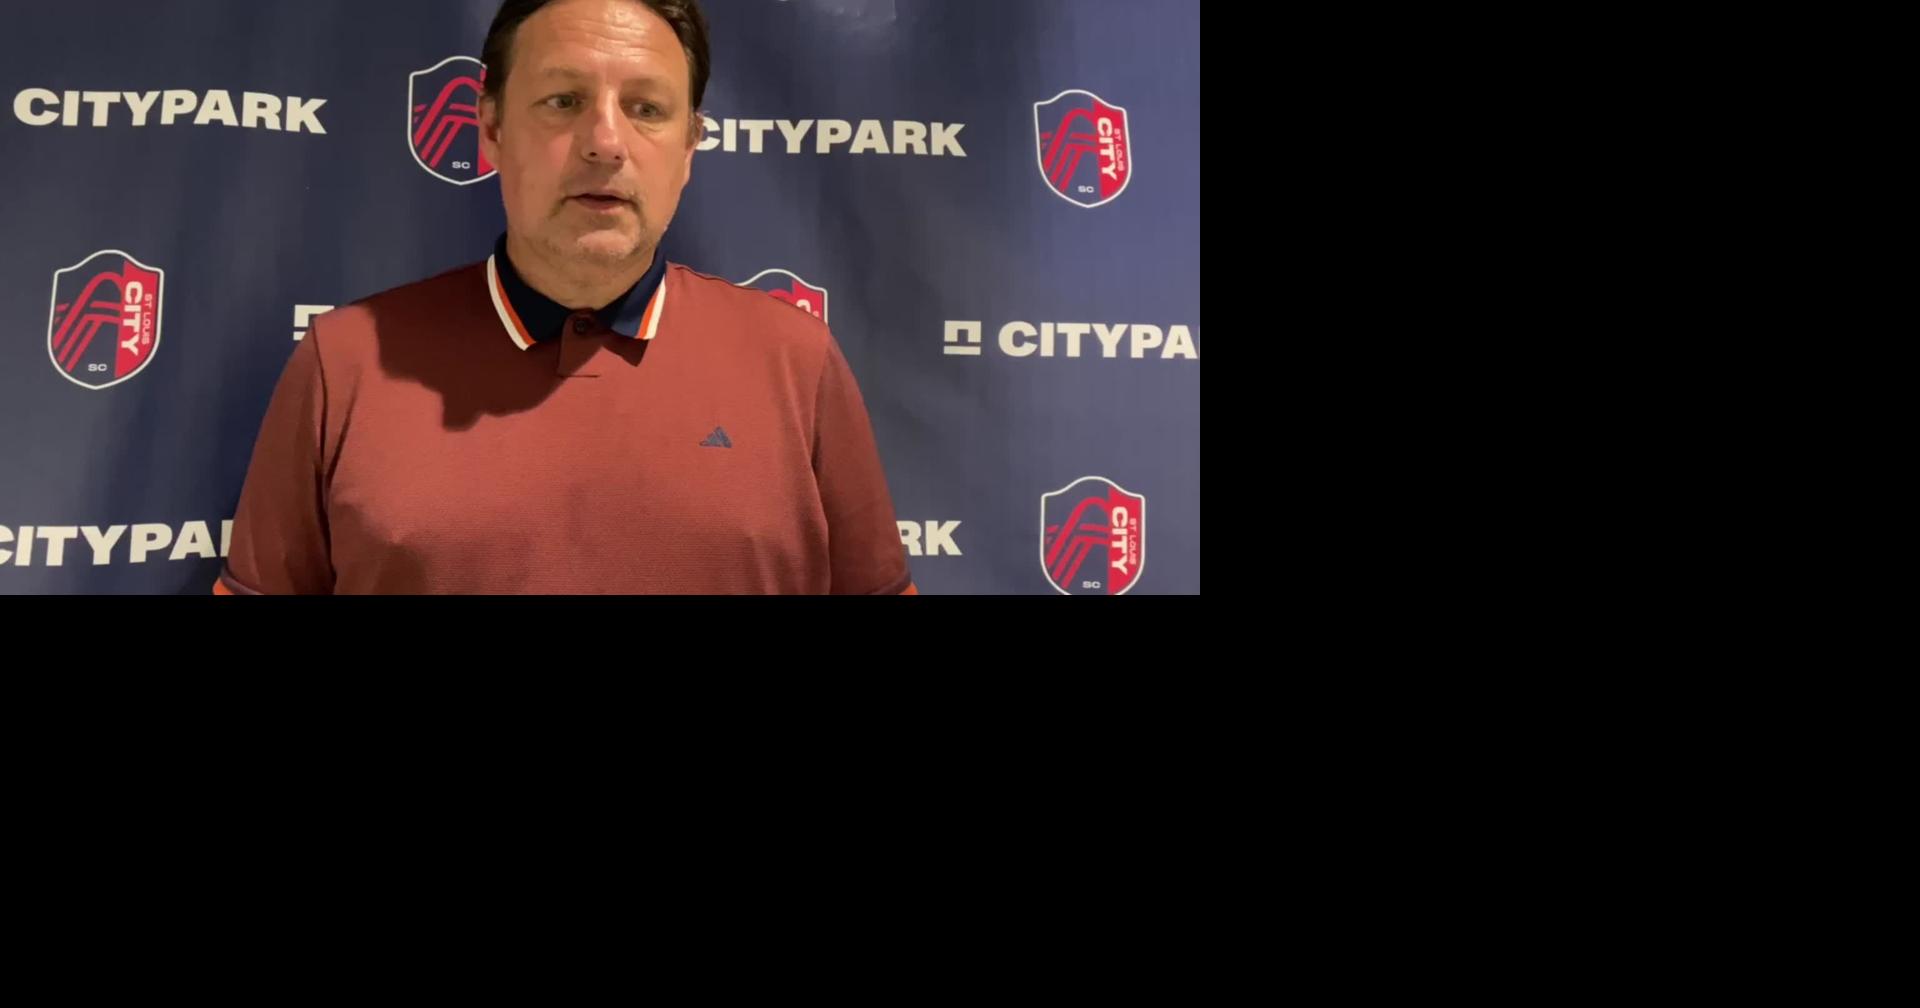 St. Louis City SC reflects on Saturday's 1-0 loss in Chicago